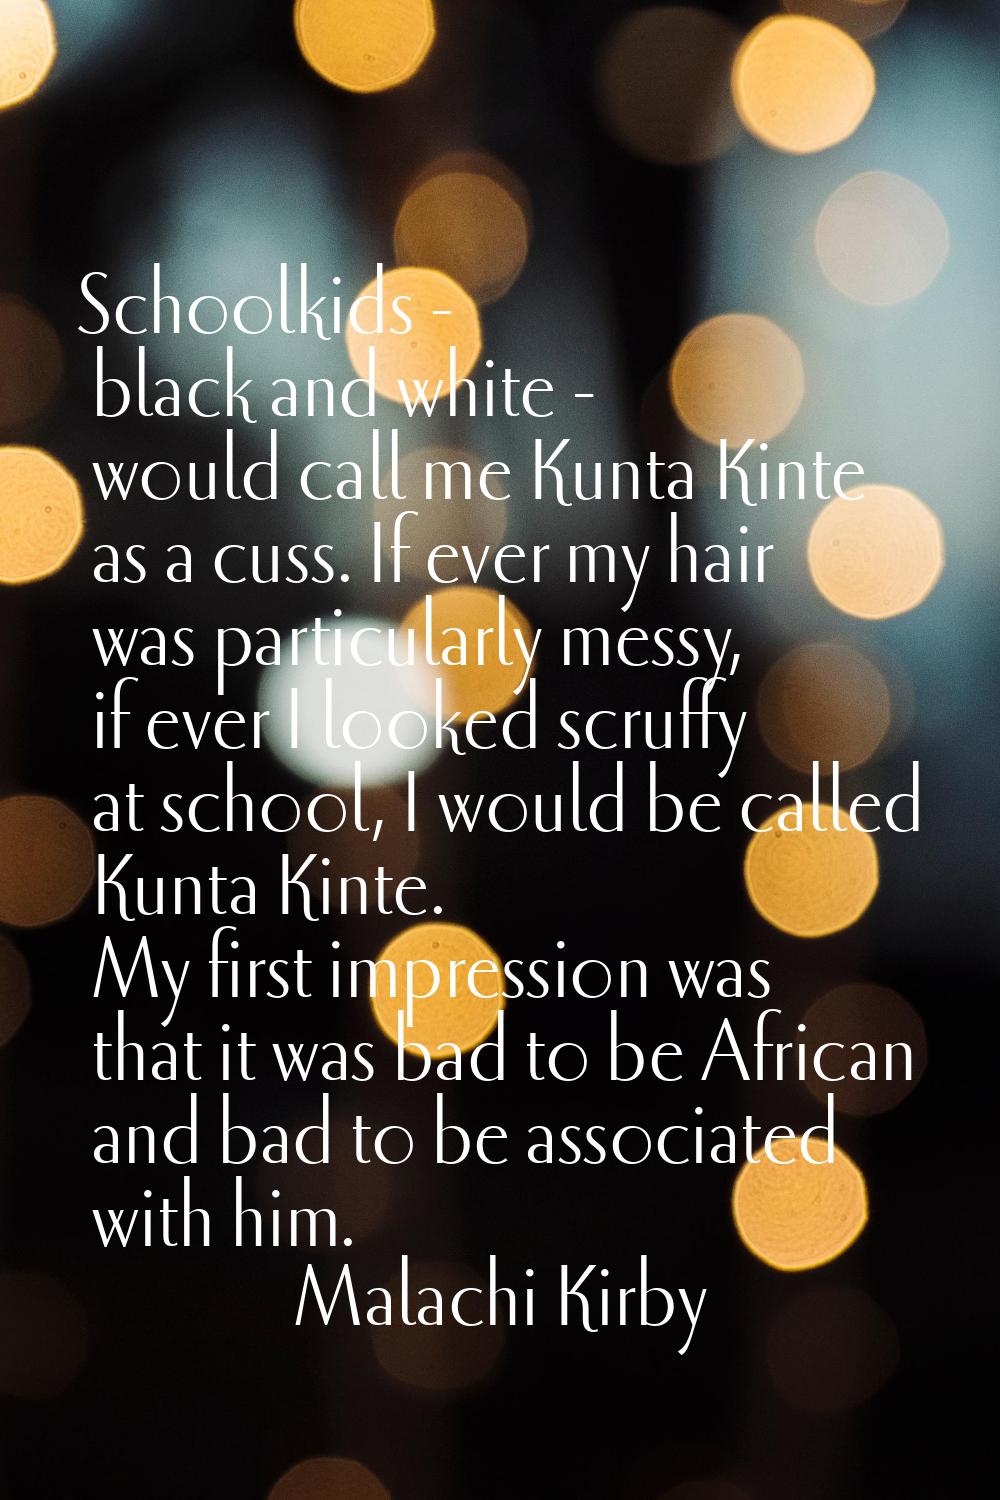 Schoolkids - black and white - would call me Kunta Kinte as a cuss. If ever my hair was particularl